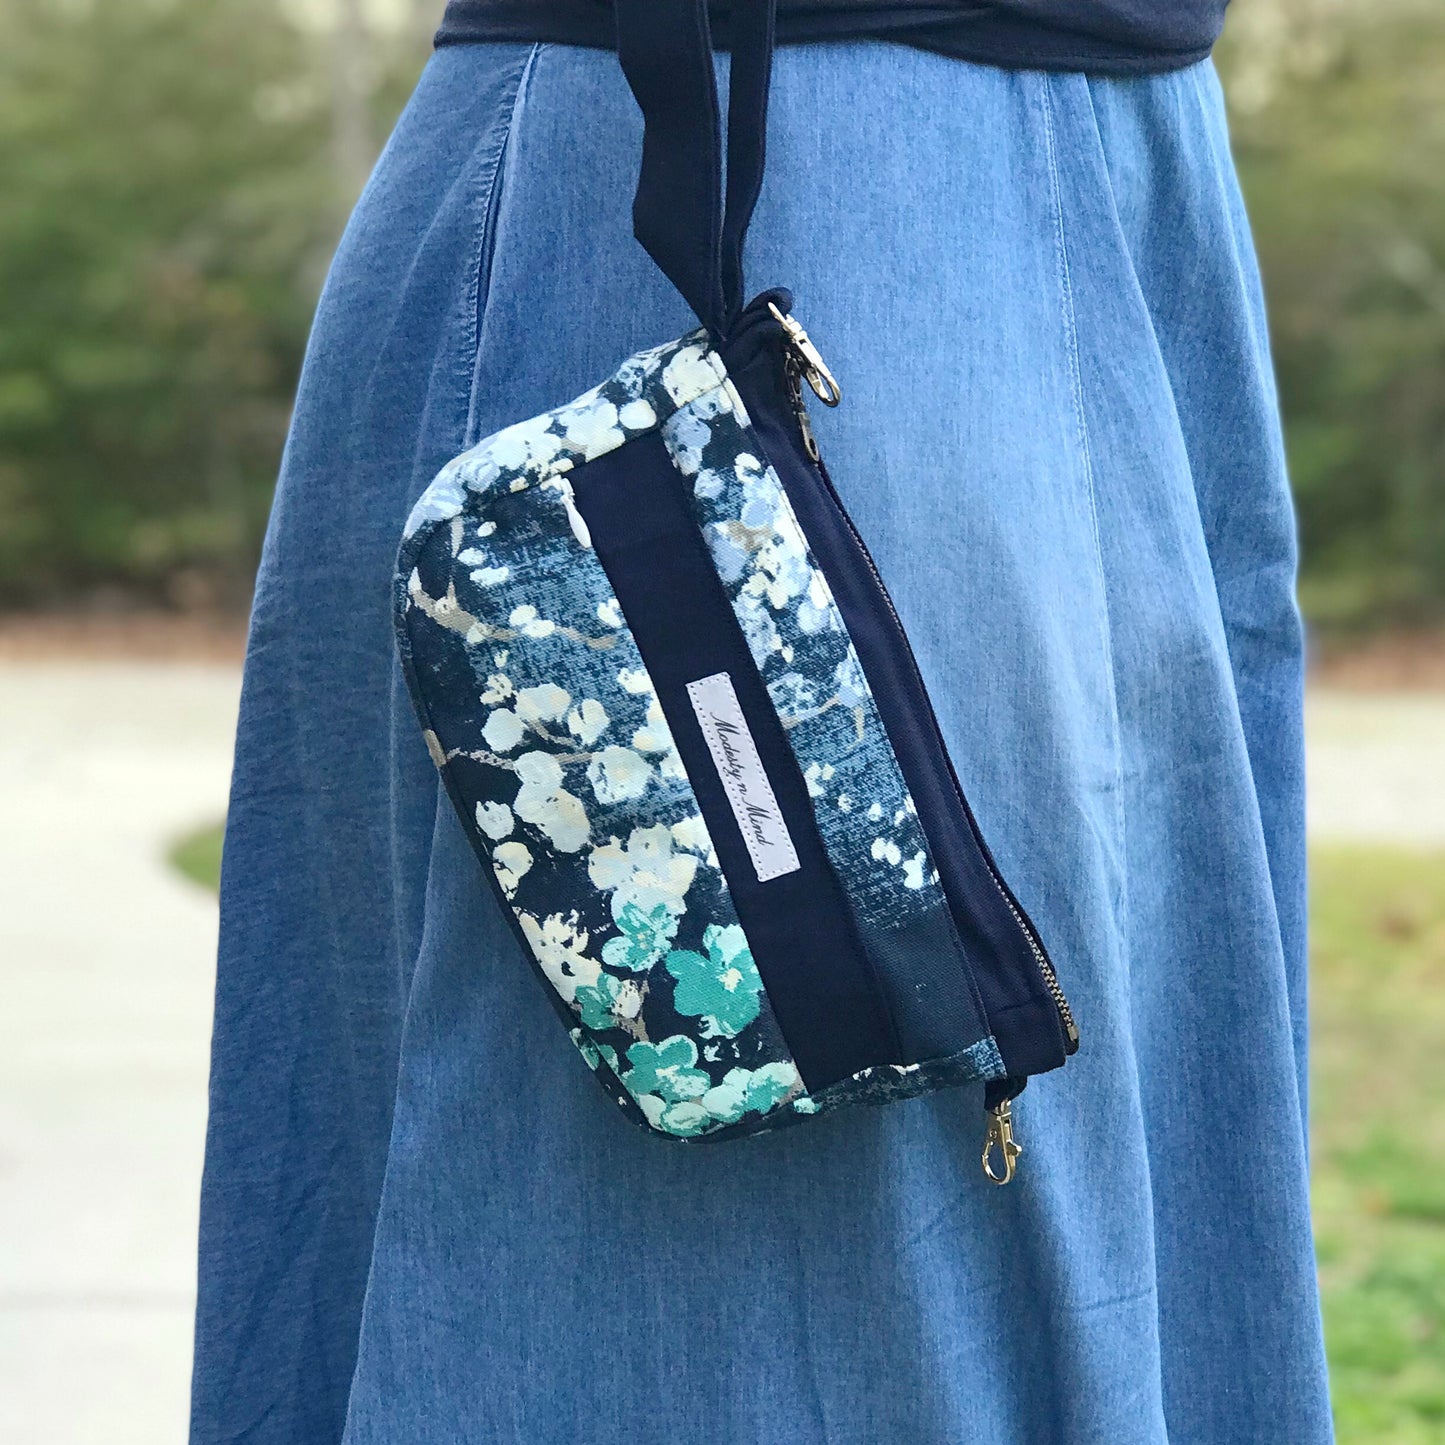 Image of blue floral wristlet being held outside with trees in the background